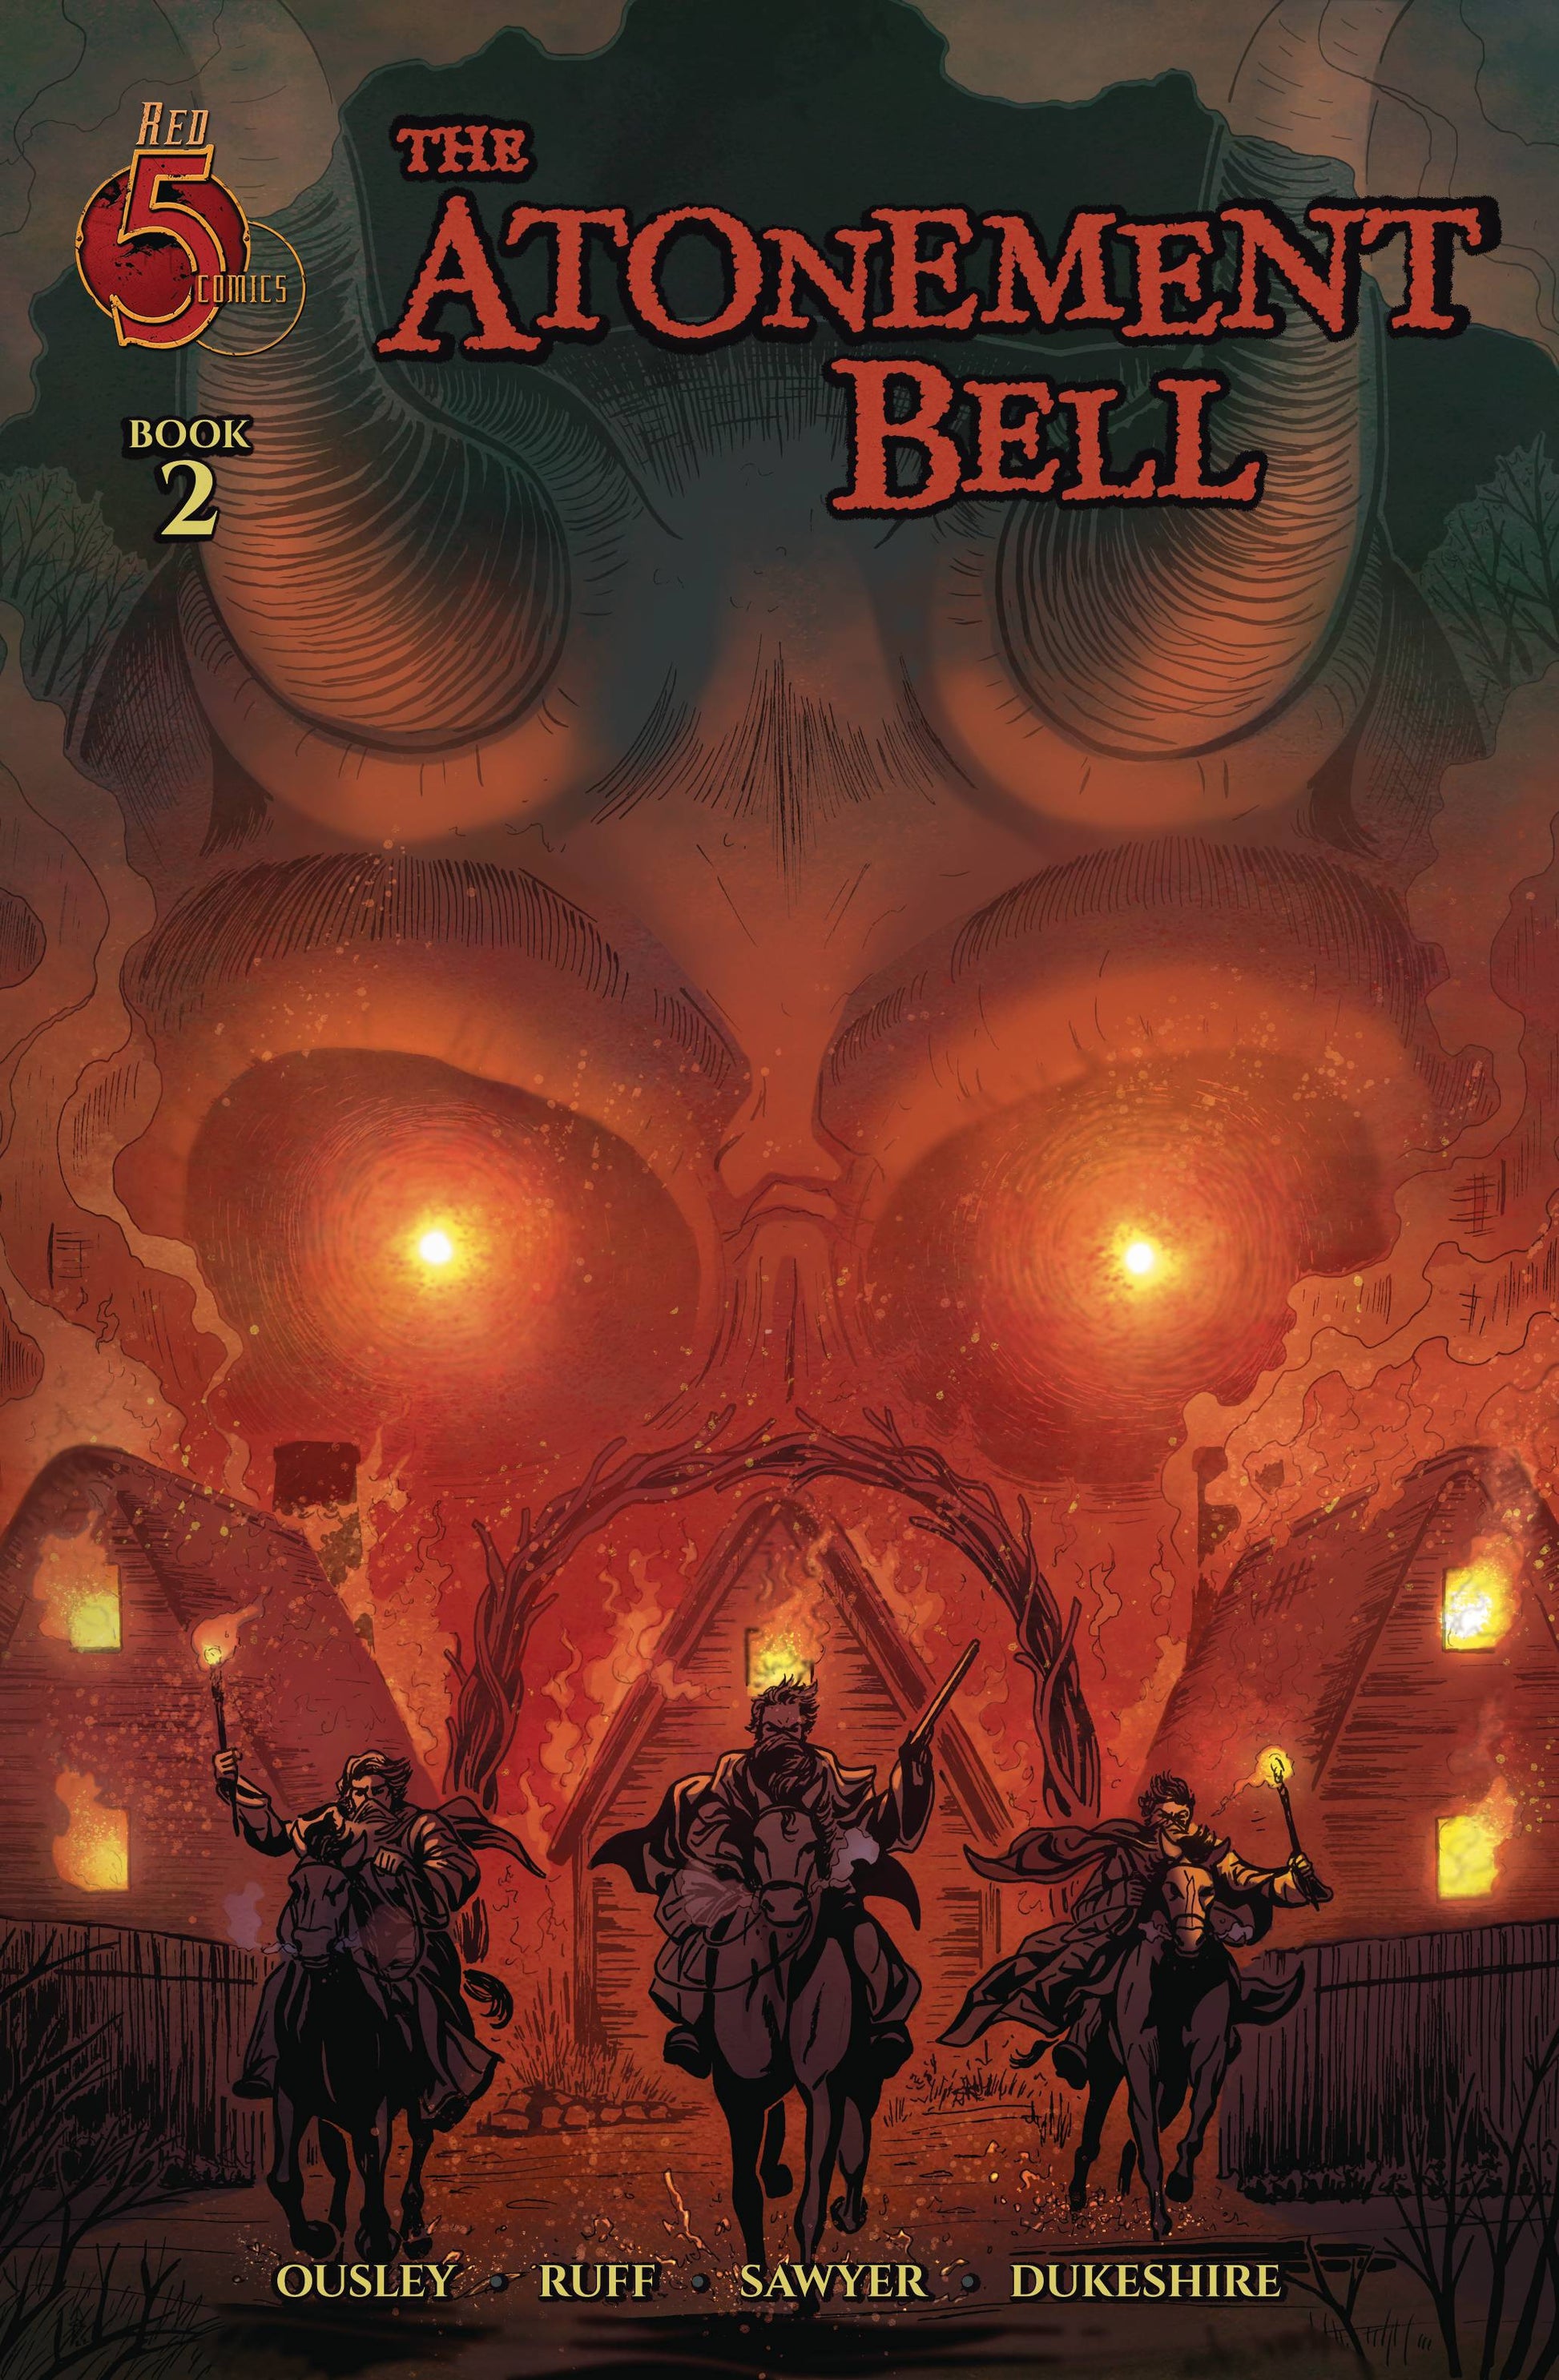 The One Stop Shop Comics & Games Atonement Bell #2 (Mr) (C: 0-0-2) (12/07/2022) RED 5 COMICS